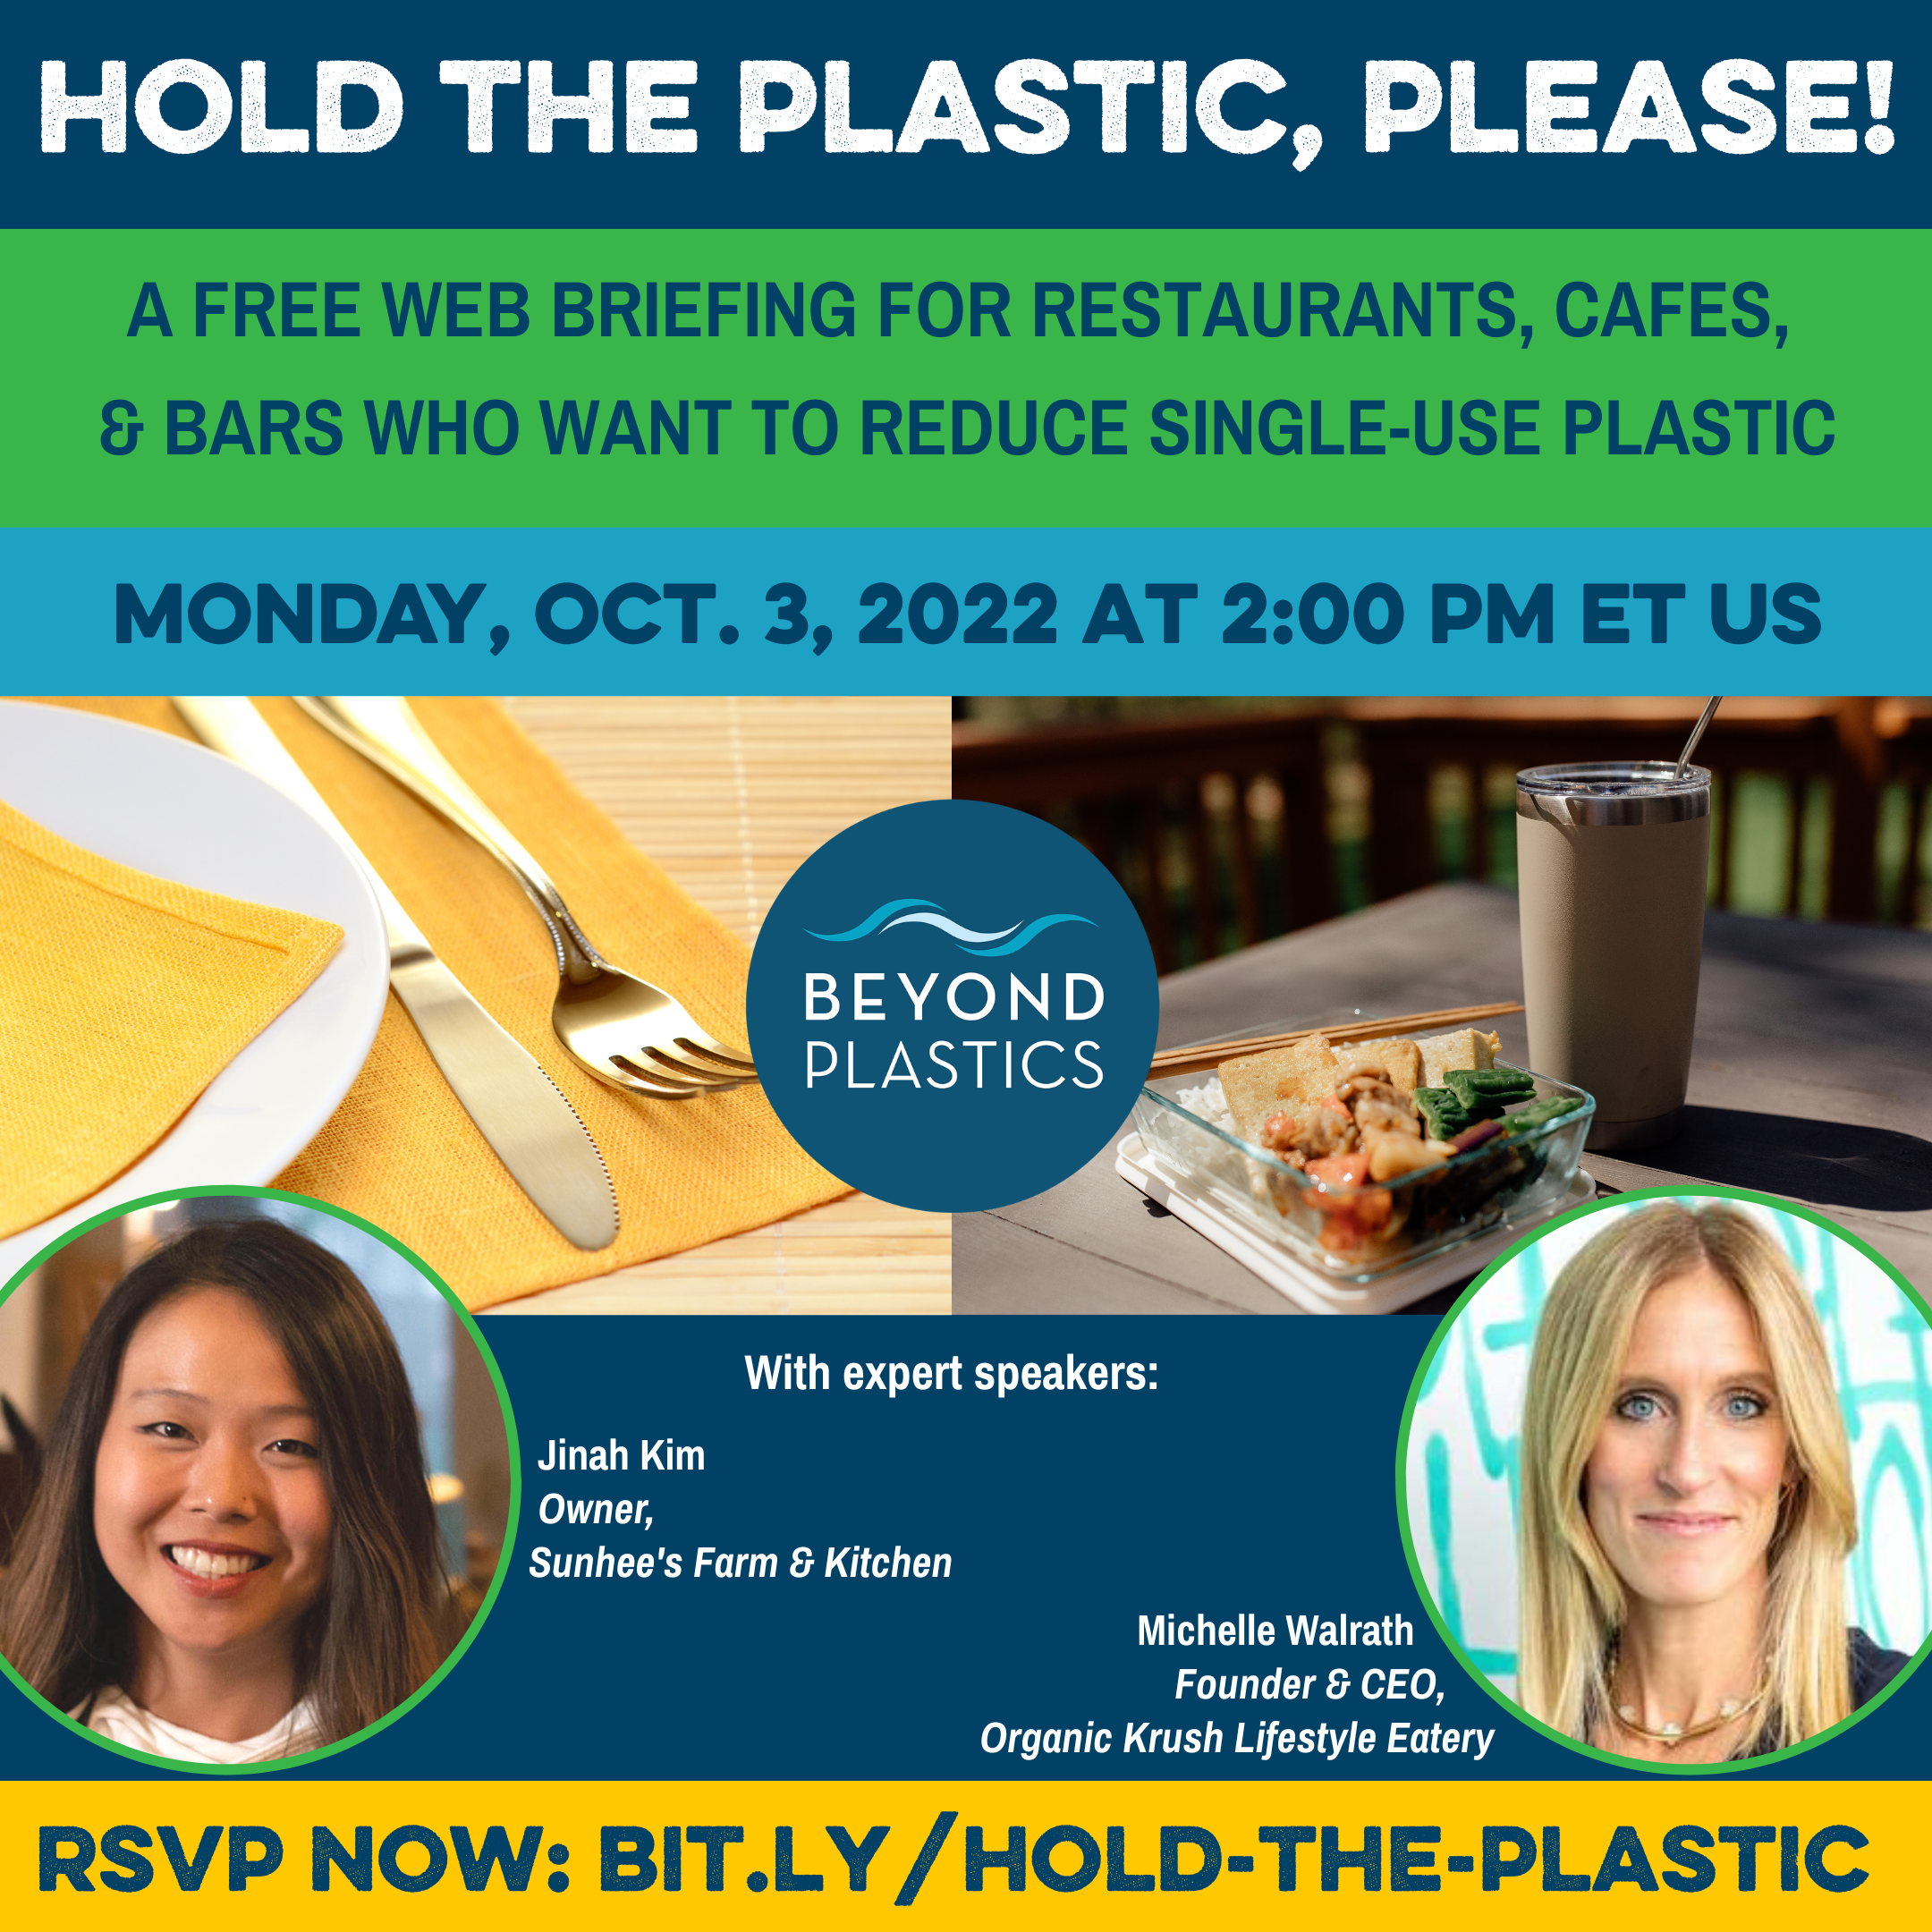 Hold the Plastic, Please! A Web Briefing For Restaurant Owners Who Want To Reduce Single-Use Plastic